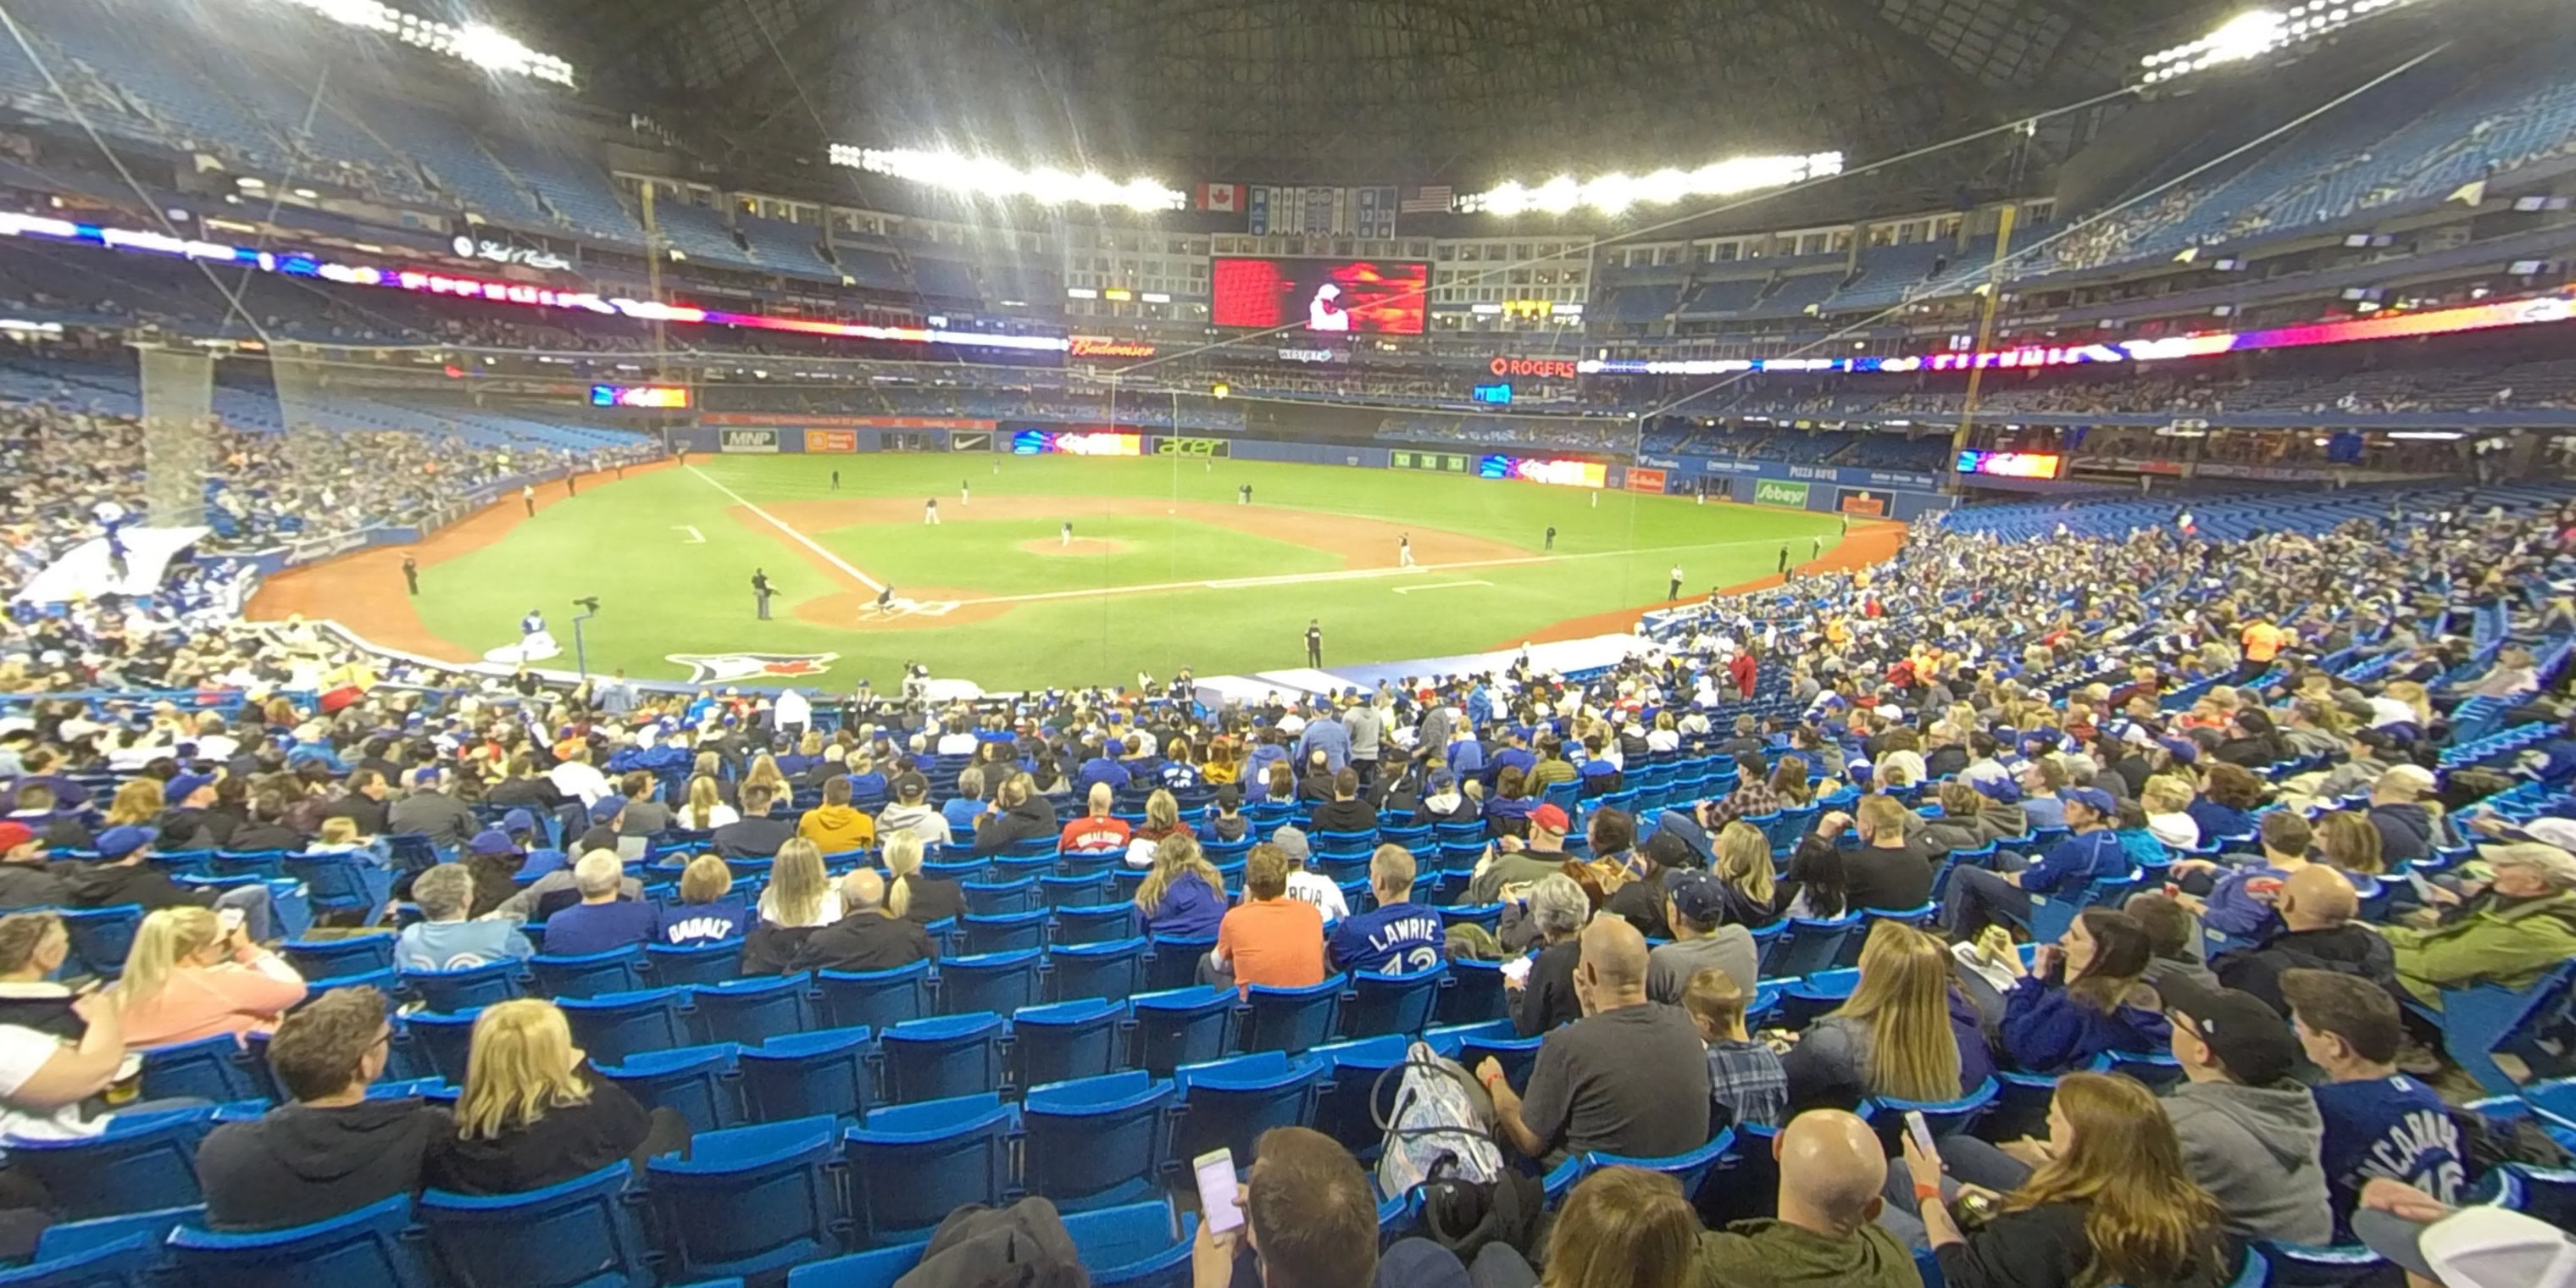 Section 120 at Rogers Centre 